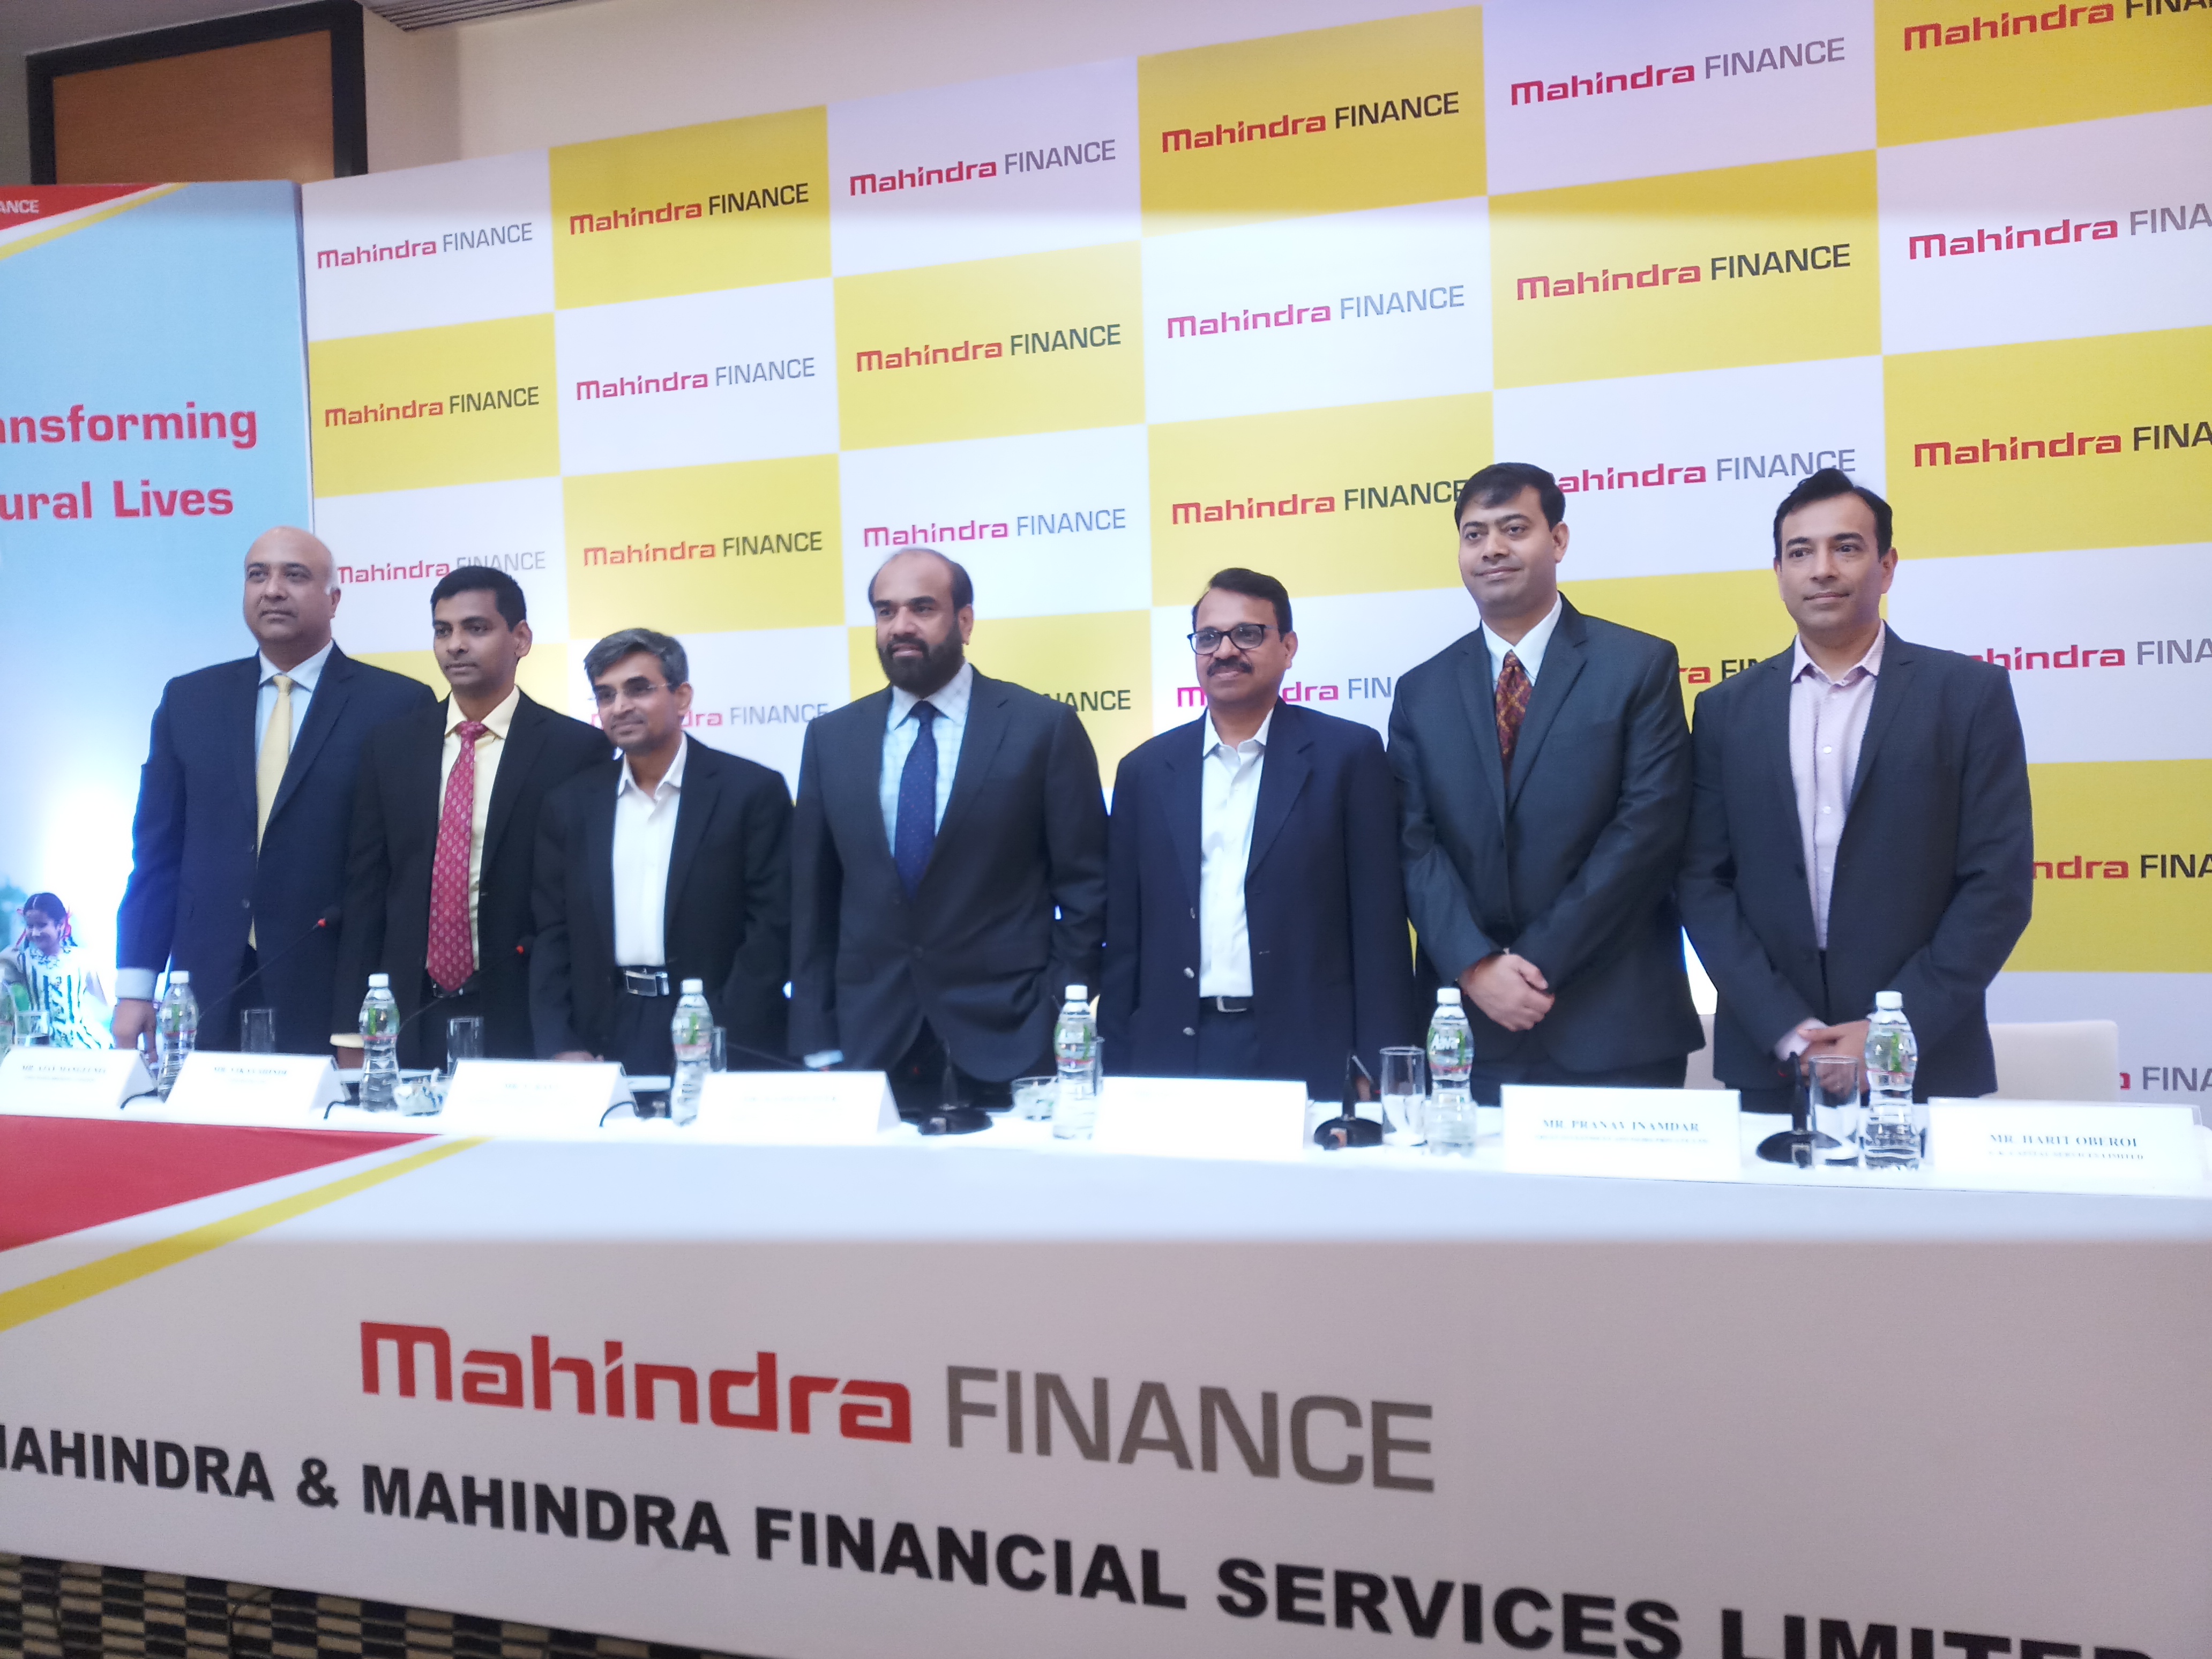 mahindra & mahindra financial services limited announces public issue of secured and unsecured subordinated redeemable non-convertible debentures (ncds of face value of rs.1000 each for an amount of rs. 500 crores, issue